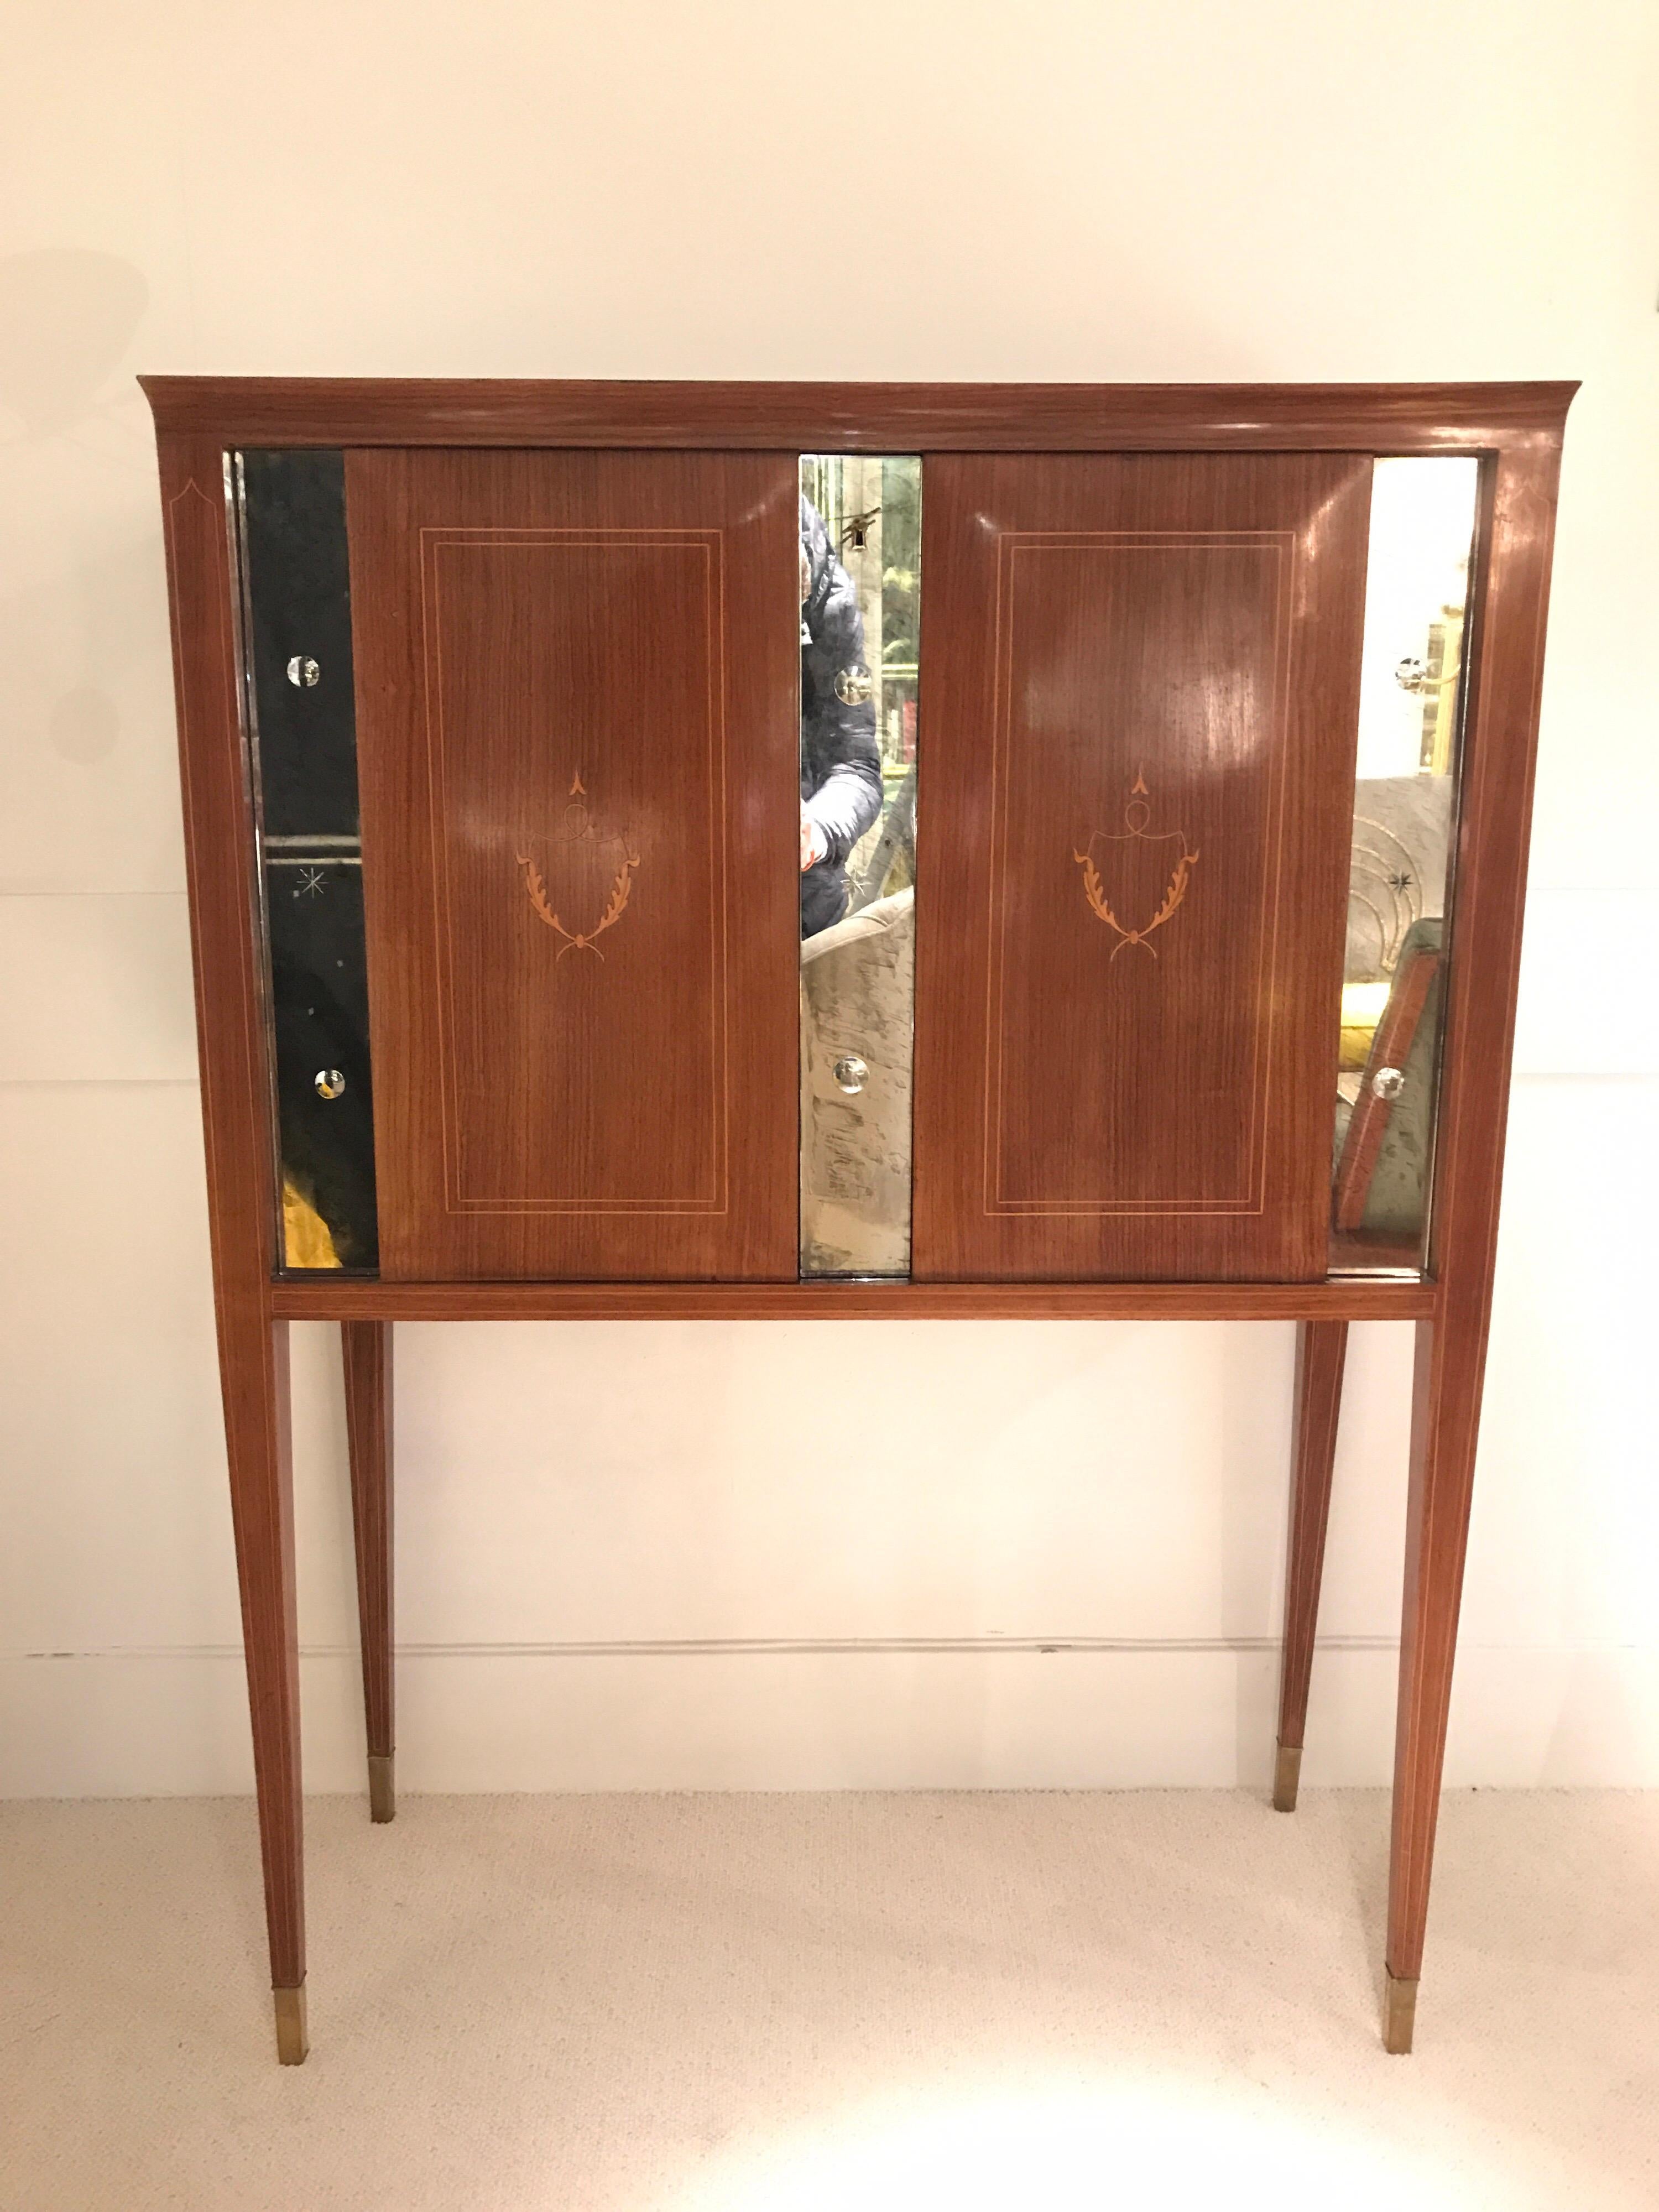 1950 Paolo Buffa cabinet bar in wood , mirror details and brass sabot
interior mirrored with light system included
vintage condition.